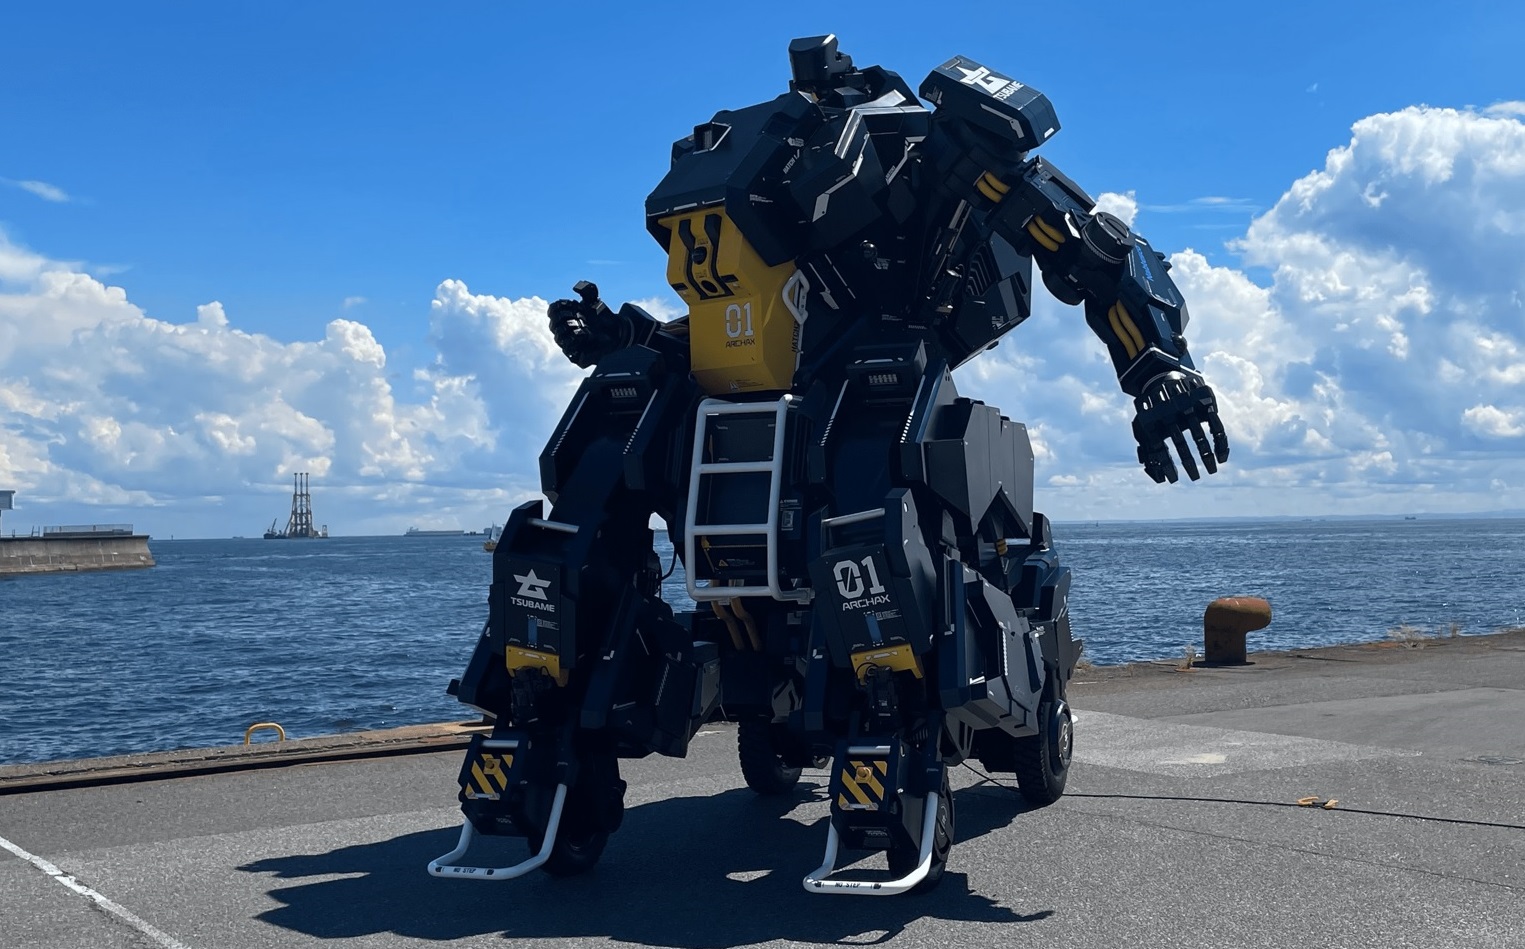 Will we ever pilot giant robots?